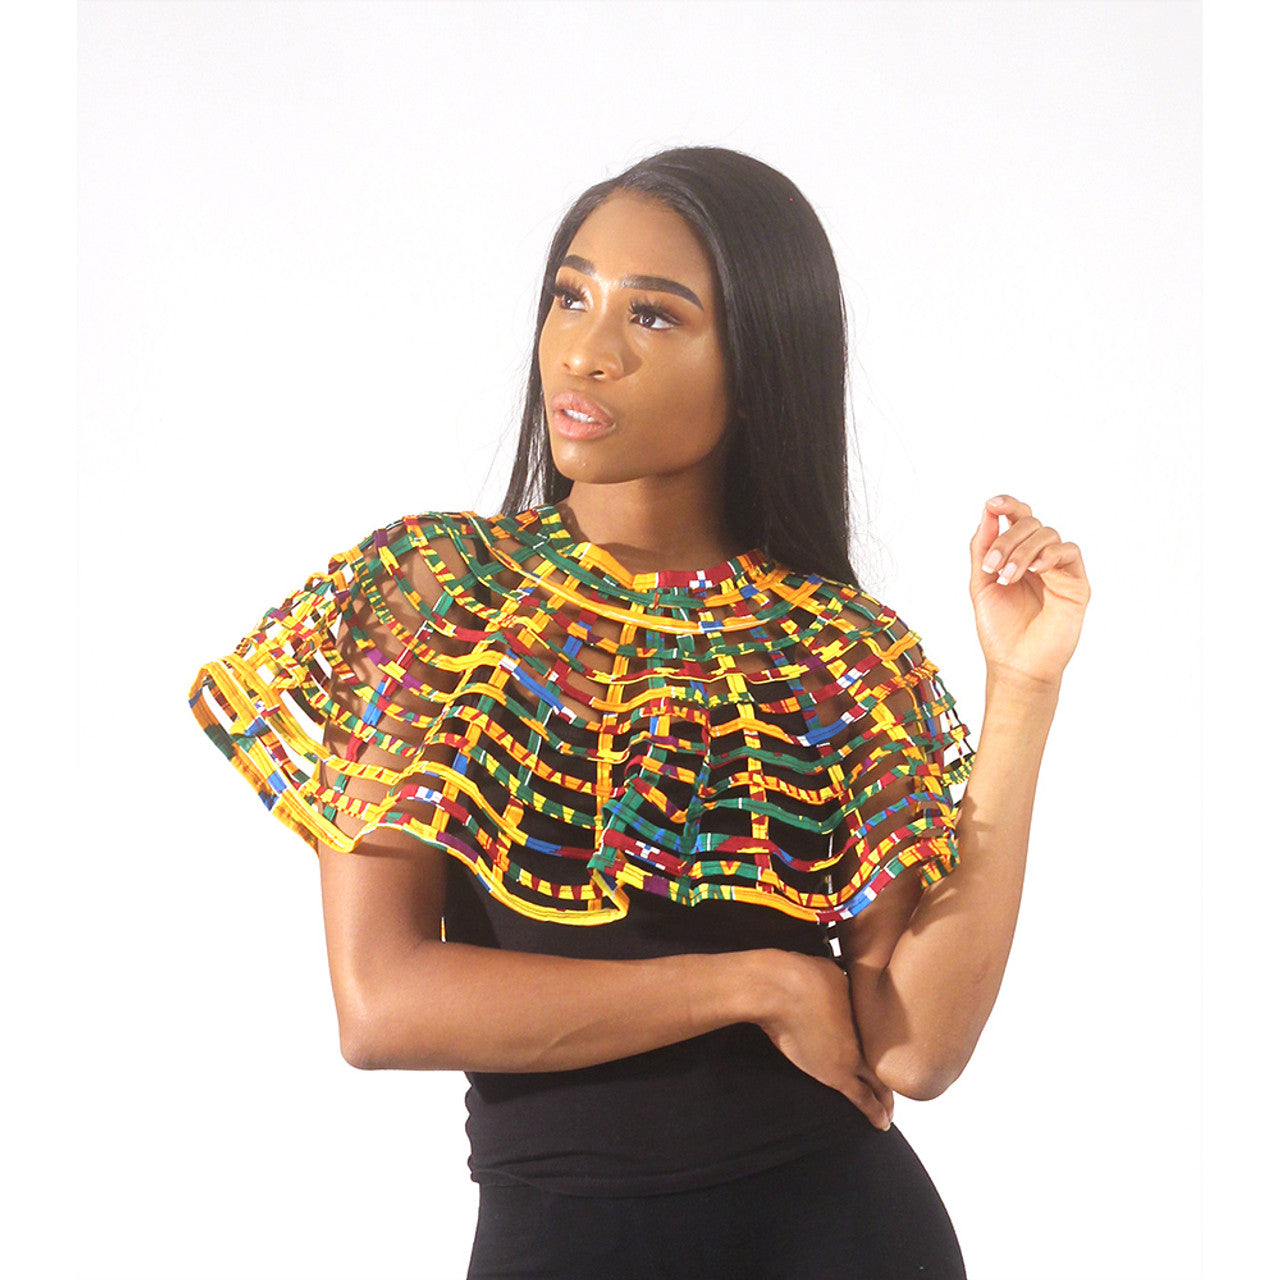  Kente Print Capette Add some eye-catching color to any ensemble with this Kente Print Capette. The capette is a short cape made with strips of material in a lattice design. It fastens at the throat. This rainbow colored capette has a traditional Kente design. It is 12” in length. Made in Ghana. C-A538 Model Miriam is 5’10" 33-26-37